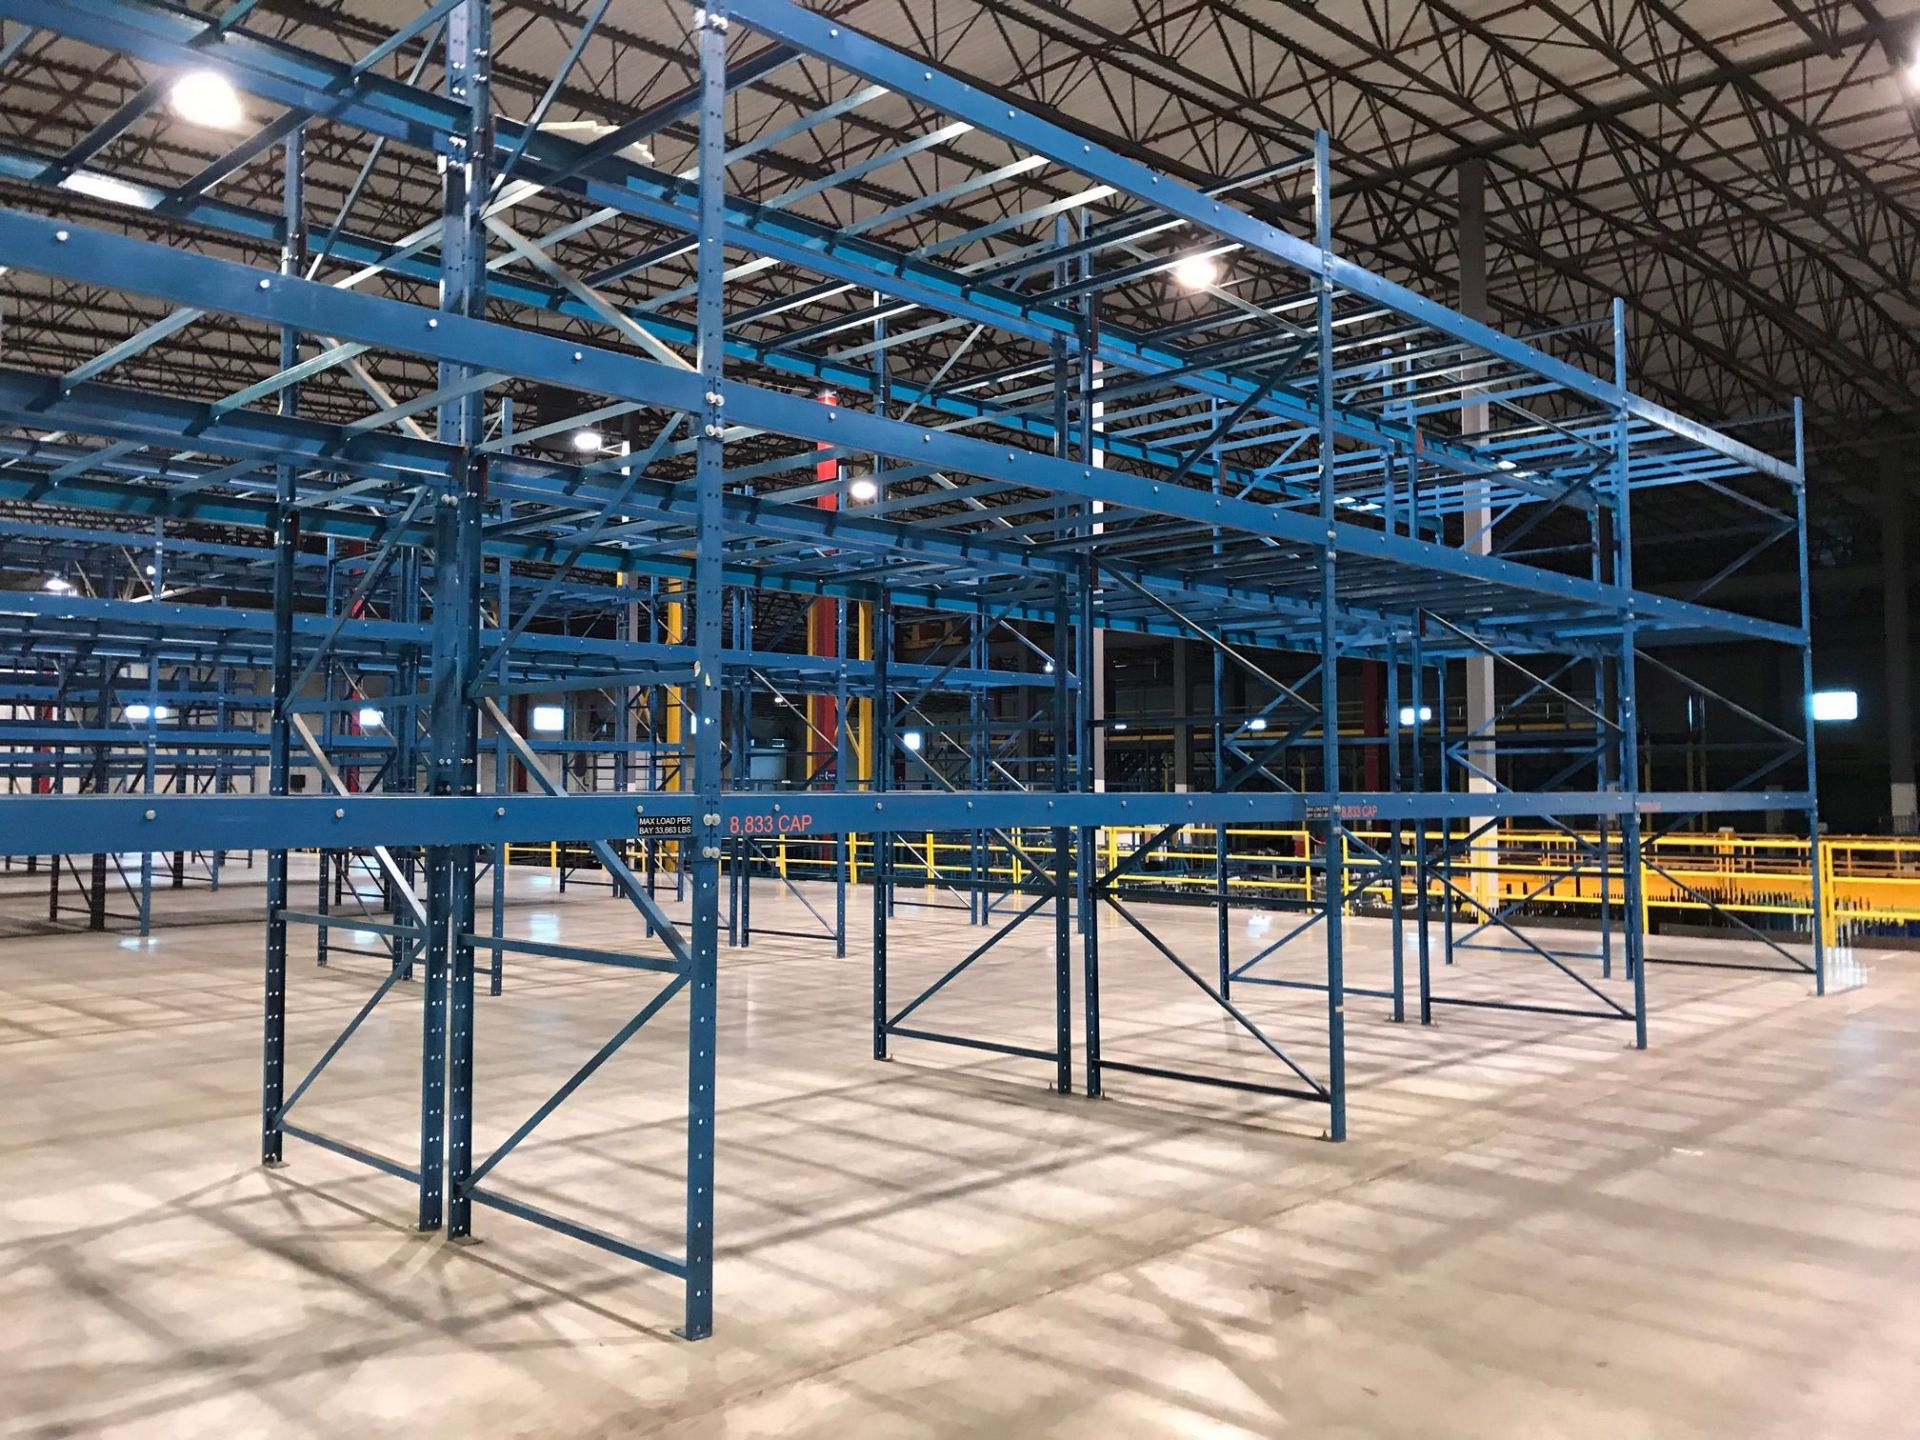 SECTIONS 144" X 60" X 192" BOLT TOGETHER TYPE ADJUSTABLE BEAM PALLET RACK WITH SHELF SUPPORTS ** - Image 2 of 4